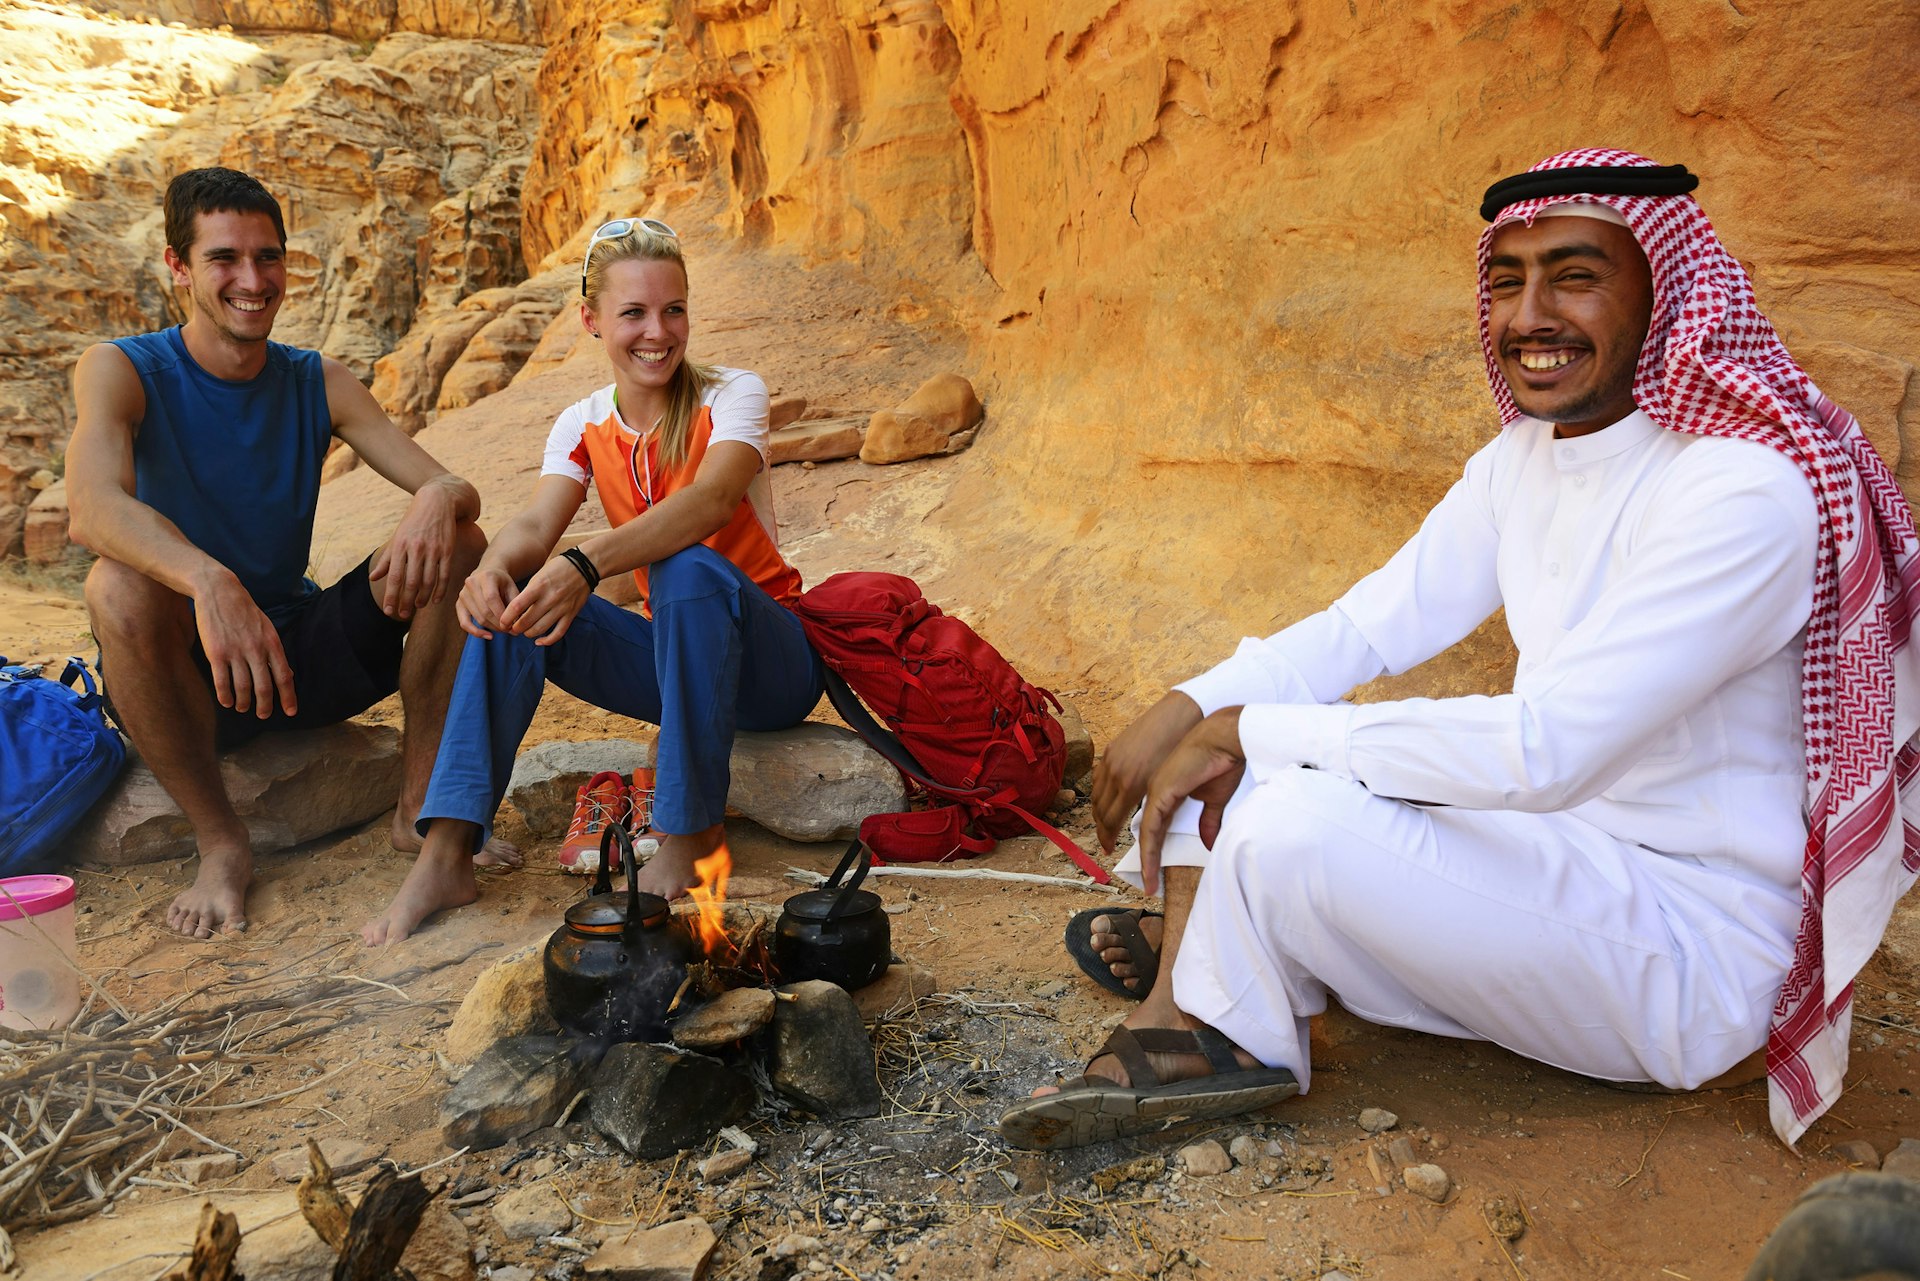 Two tourists smile as they drink tea with their Bedouin guide in Wadi Rum, Jordan